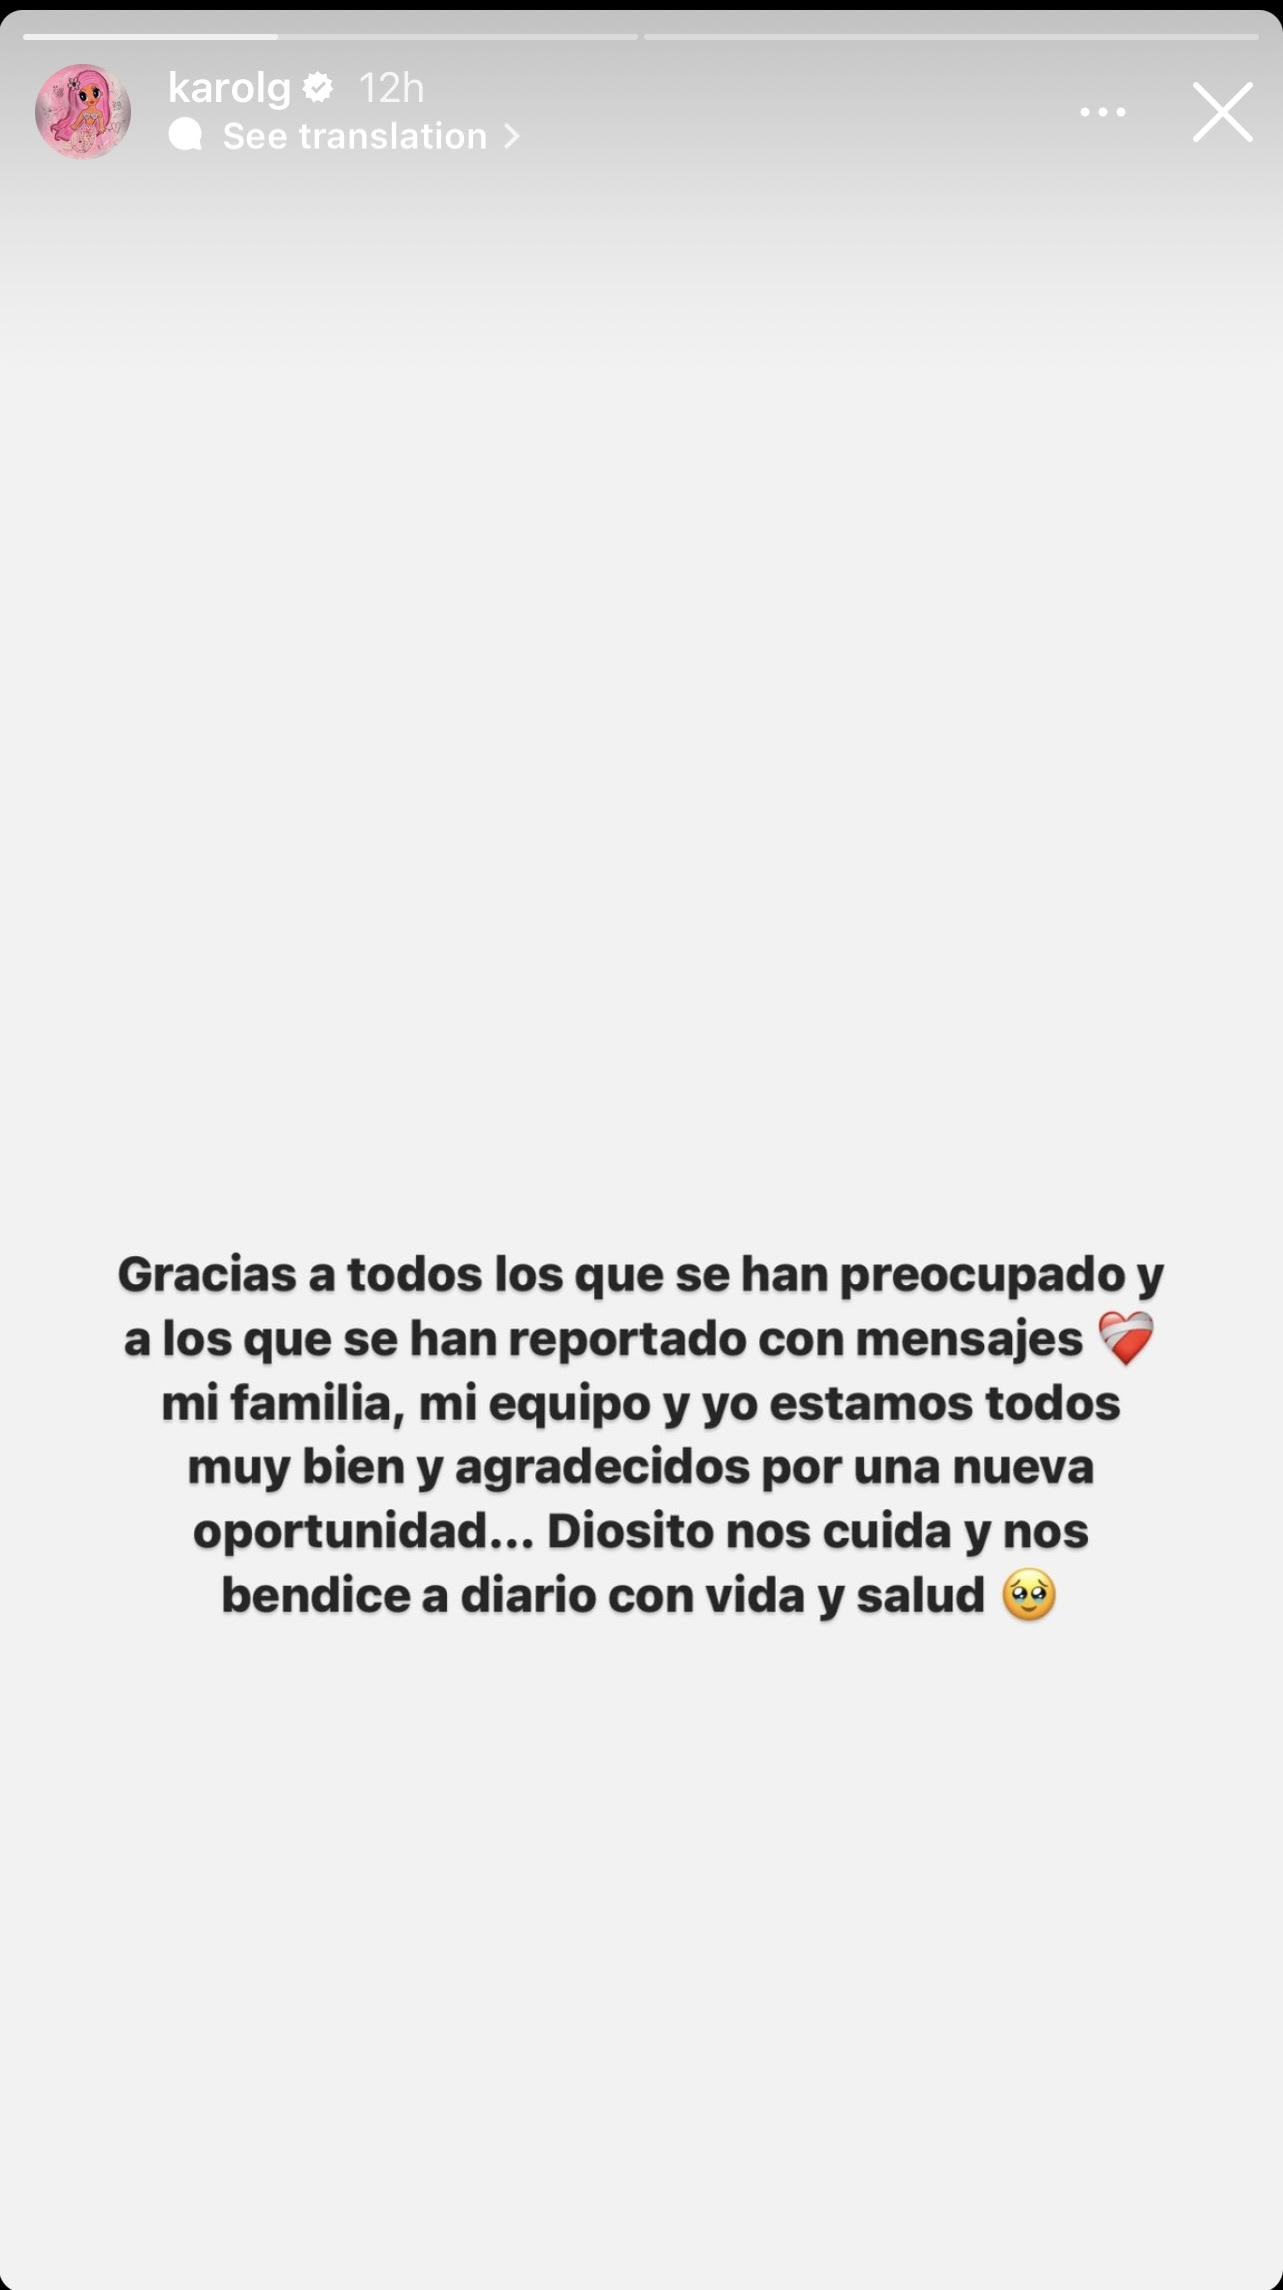 Screenshot of a social media post from Karol G thanking followers for their concern and support, expressing gratitude from the poster&#x27;s family and team